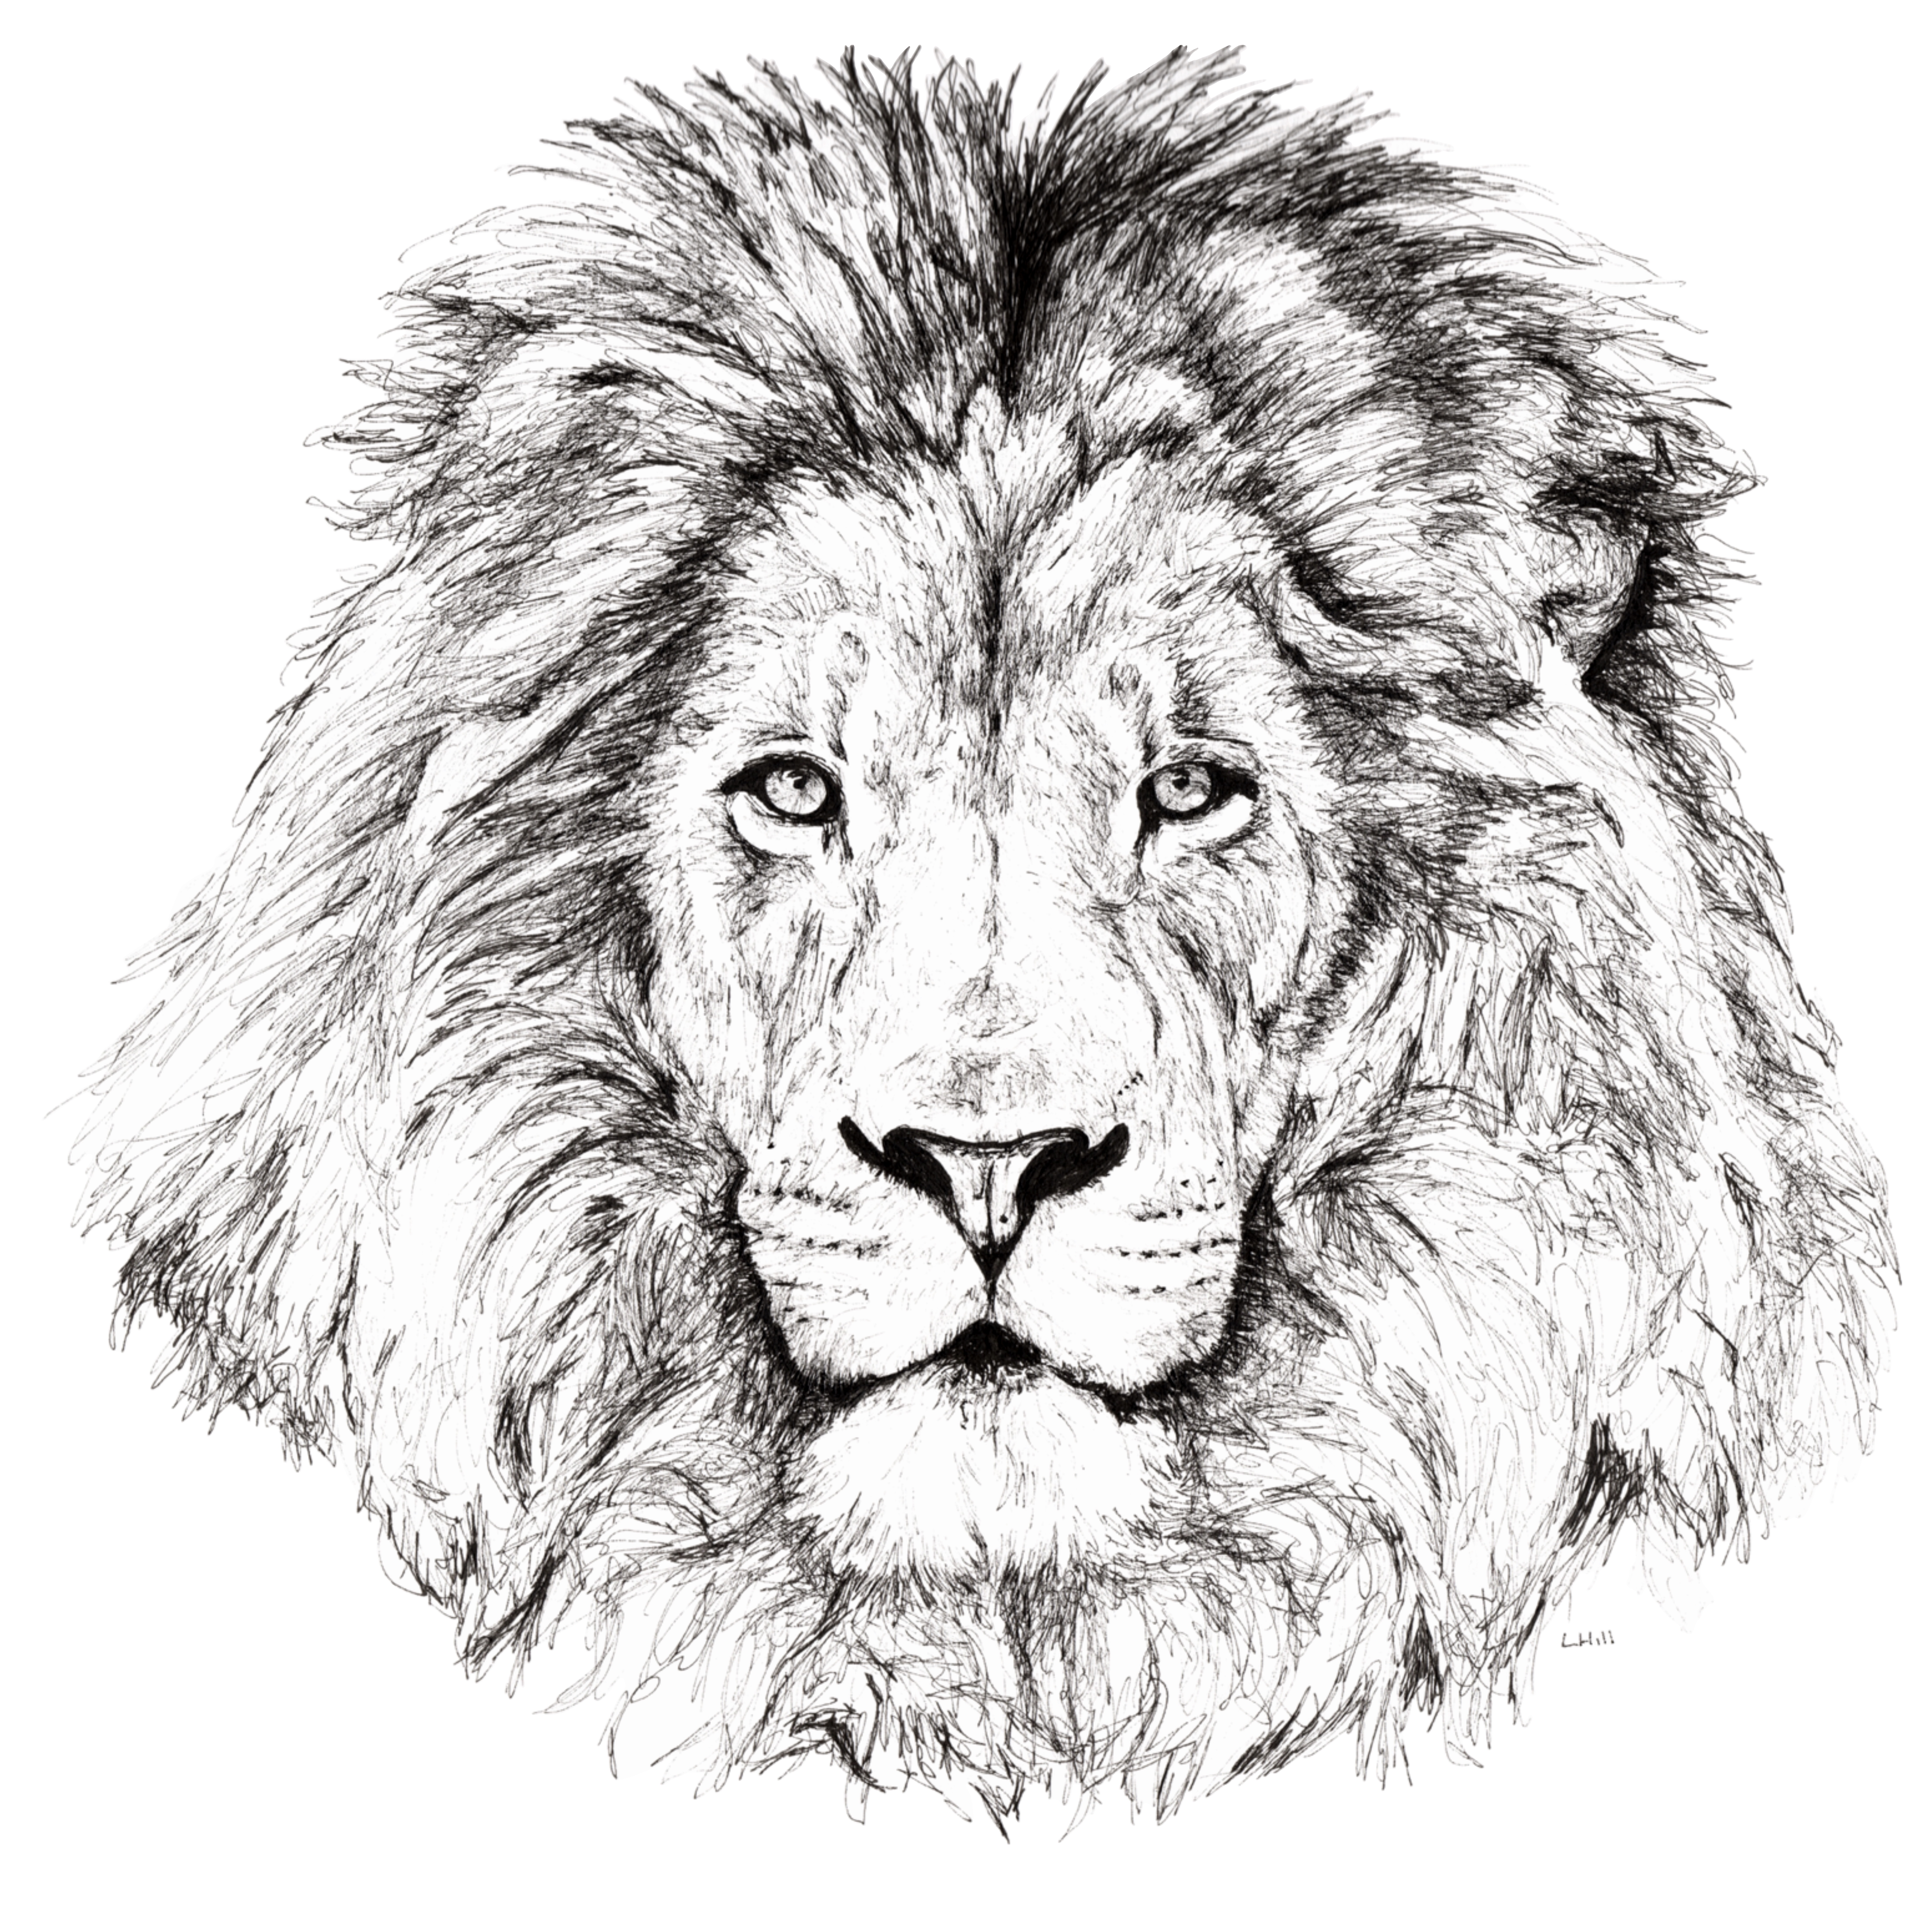 Lion pen and ink illustration by Louisa Hill